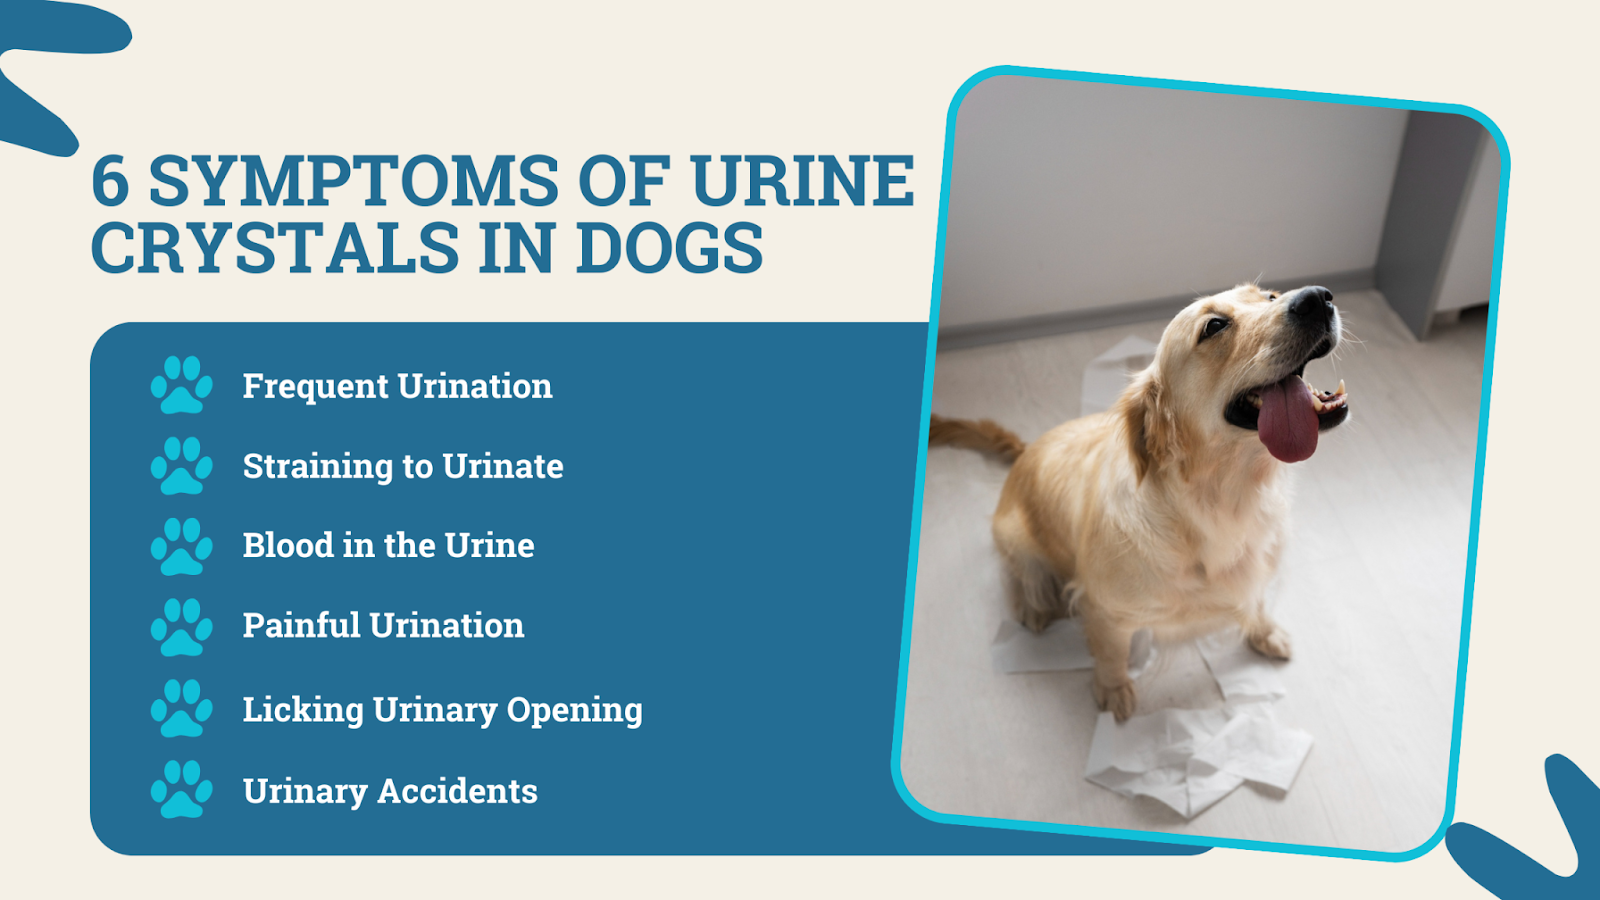 6 symptoms of urine crystals in dogs